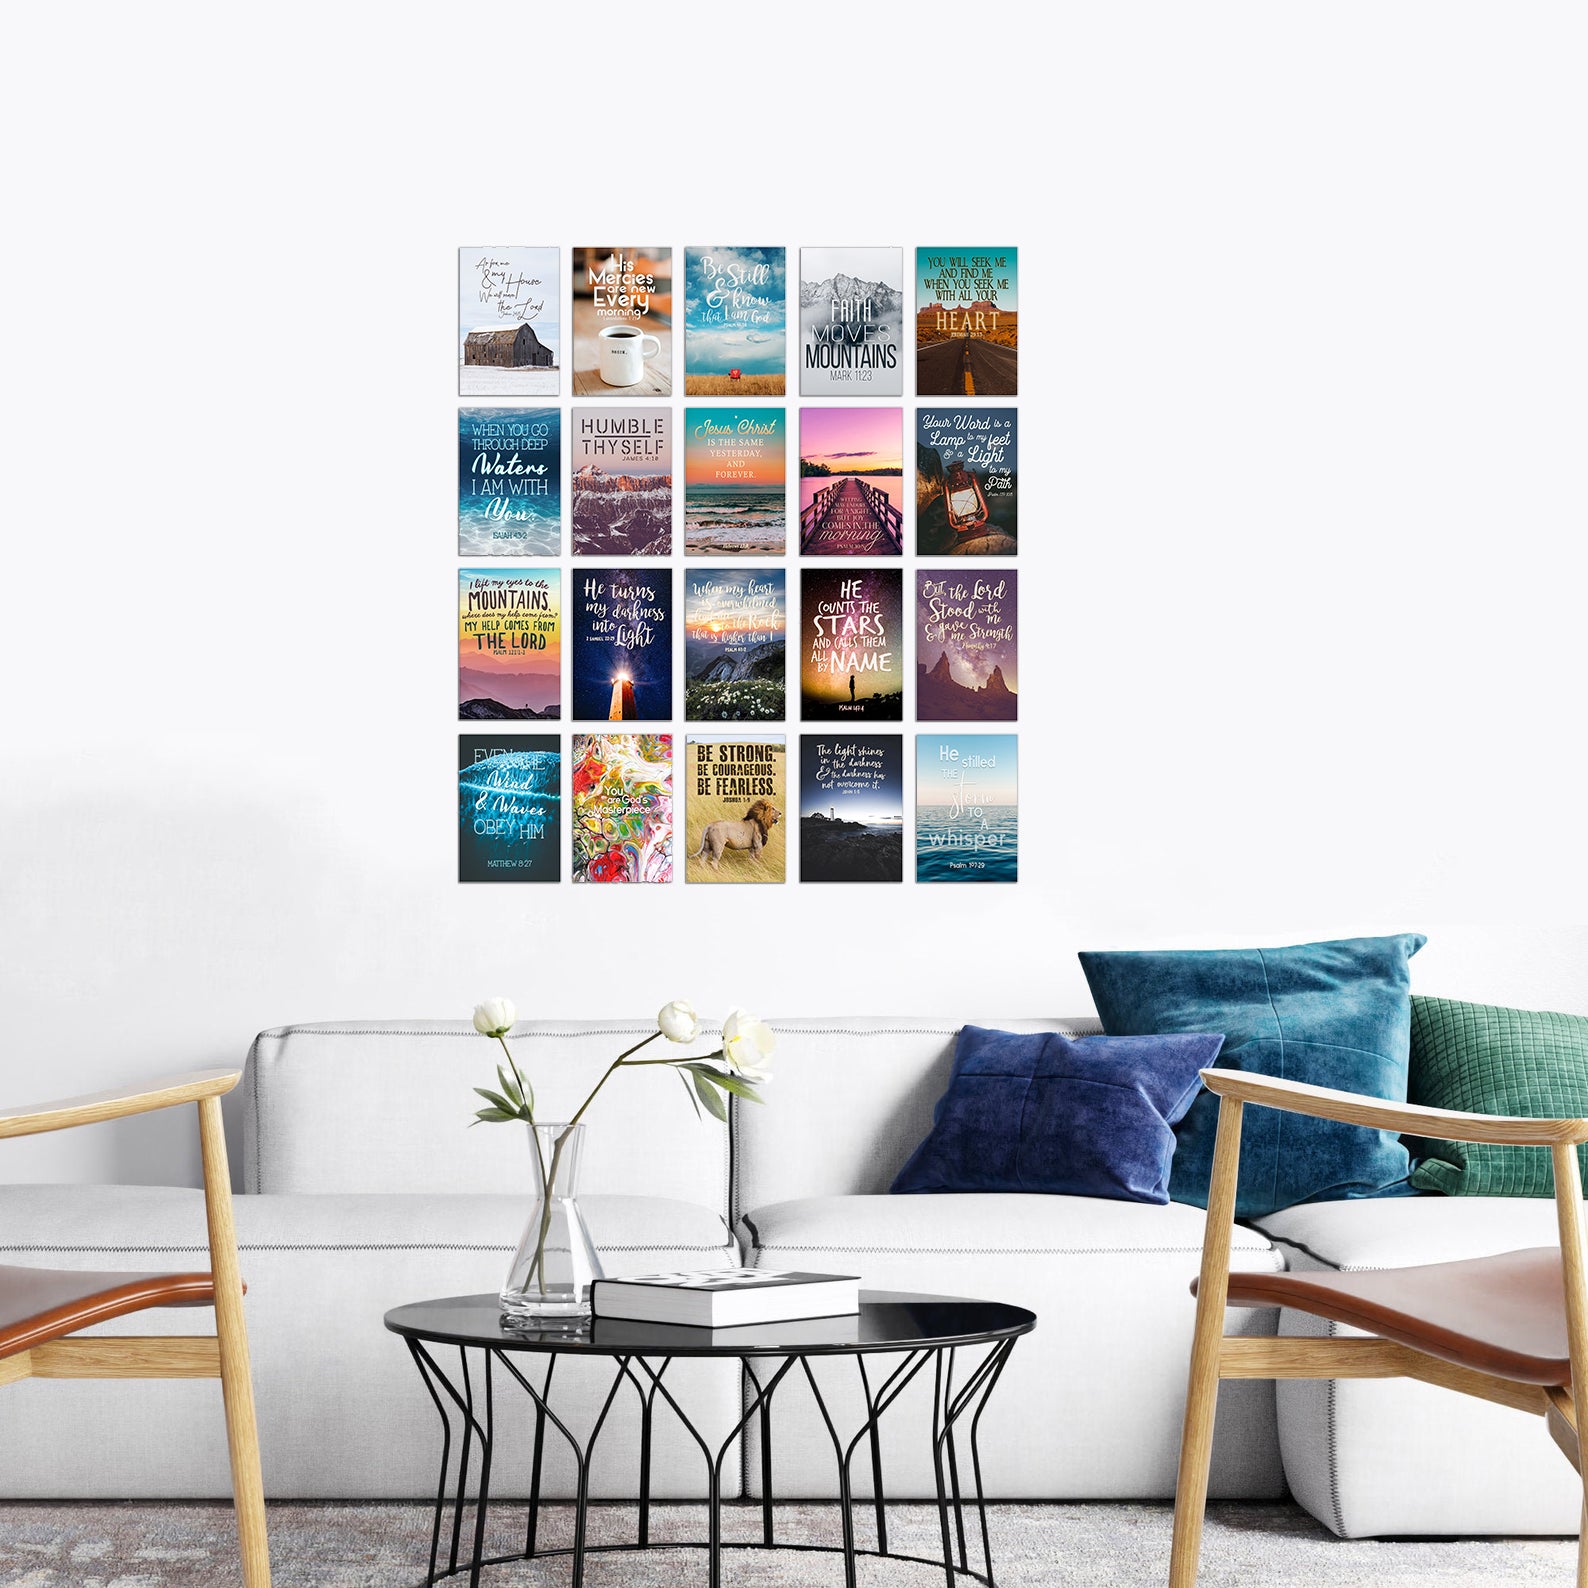 20 Bible Verse Photography Aesthetic Collage Kit, Teen Room Wall